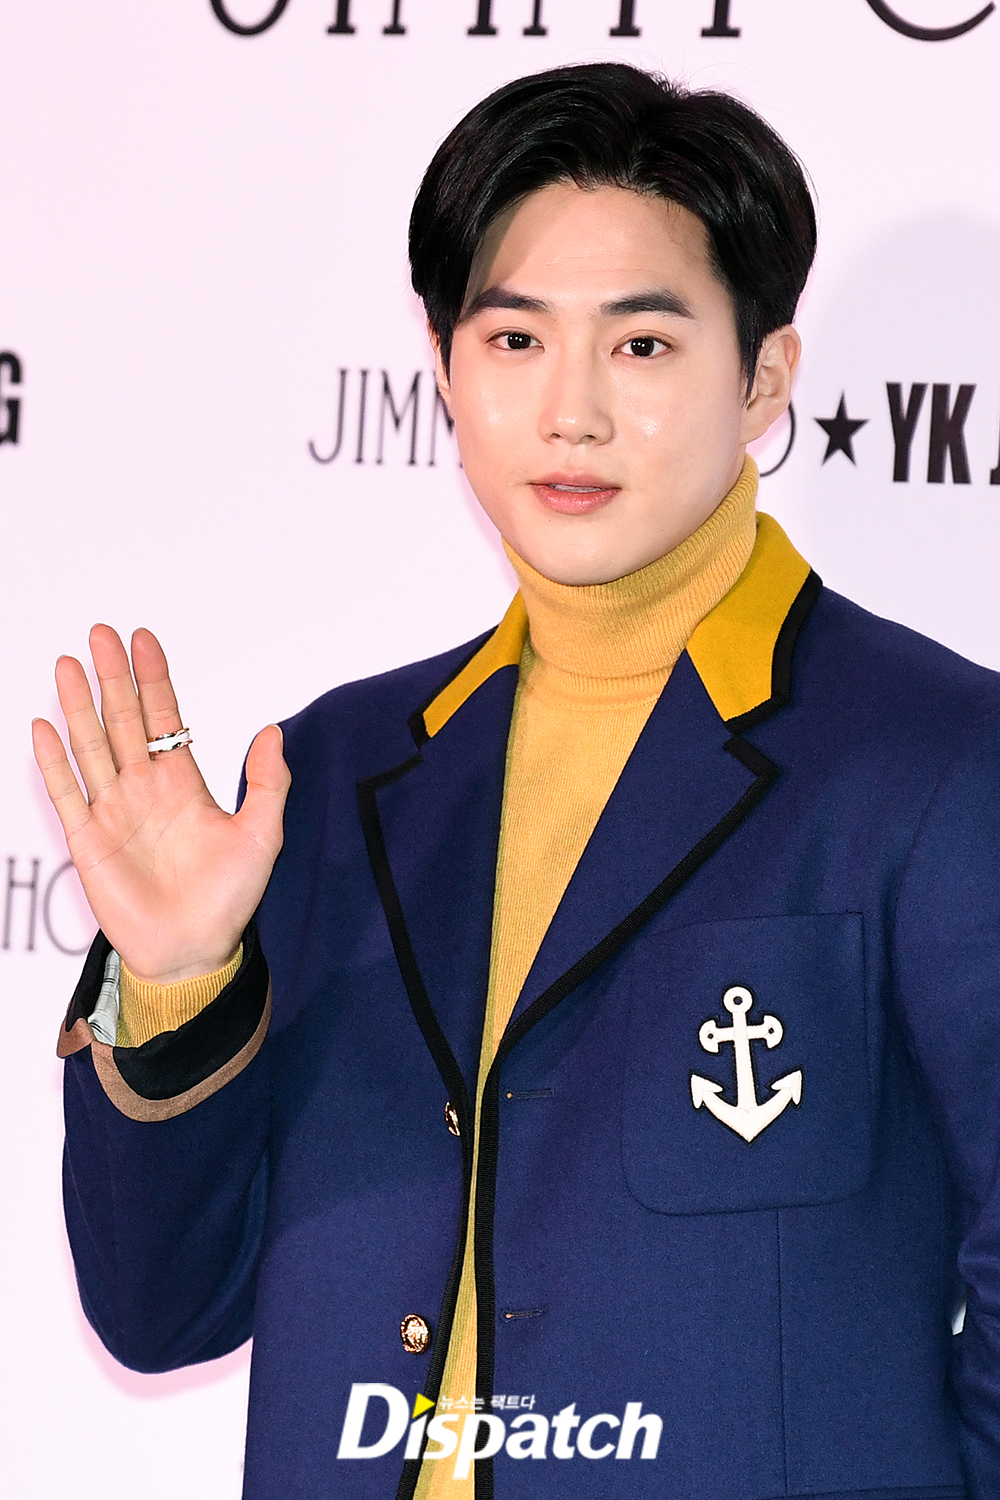 EXO Suho attended the brand event held at the Nonhyeon-dong dress garden in Gangnam-gu, Seoul on the afternoon of the 9th day.Suho was impressed with his clear skin without any blemishes on the day.shiny honey skina meeting free pass award